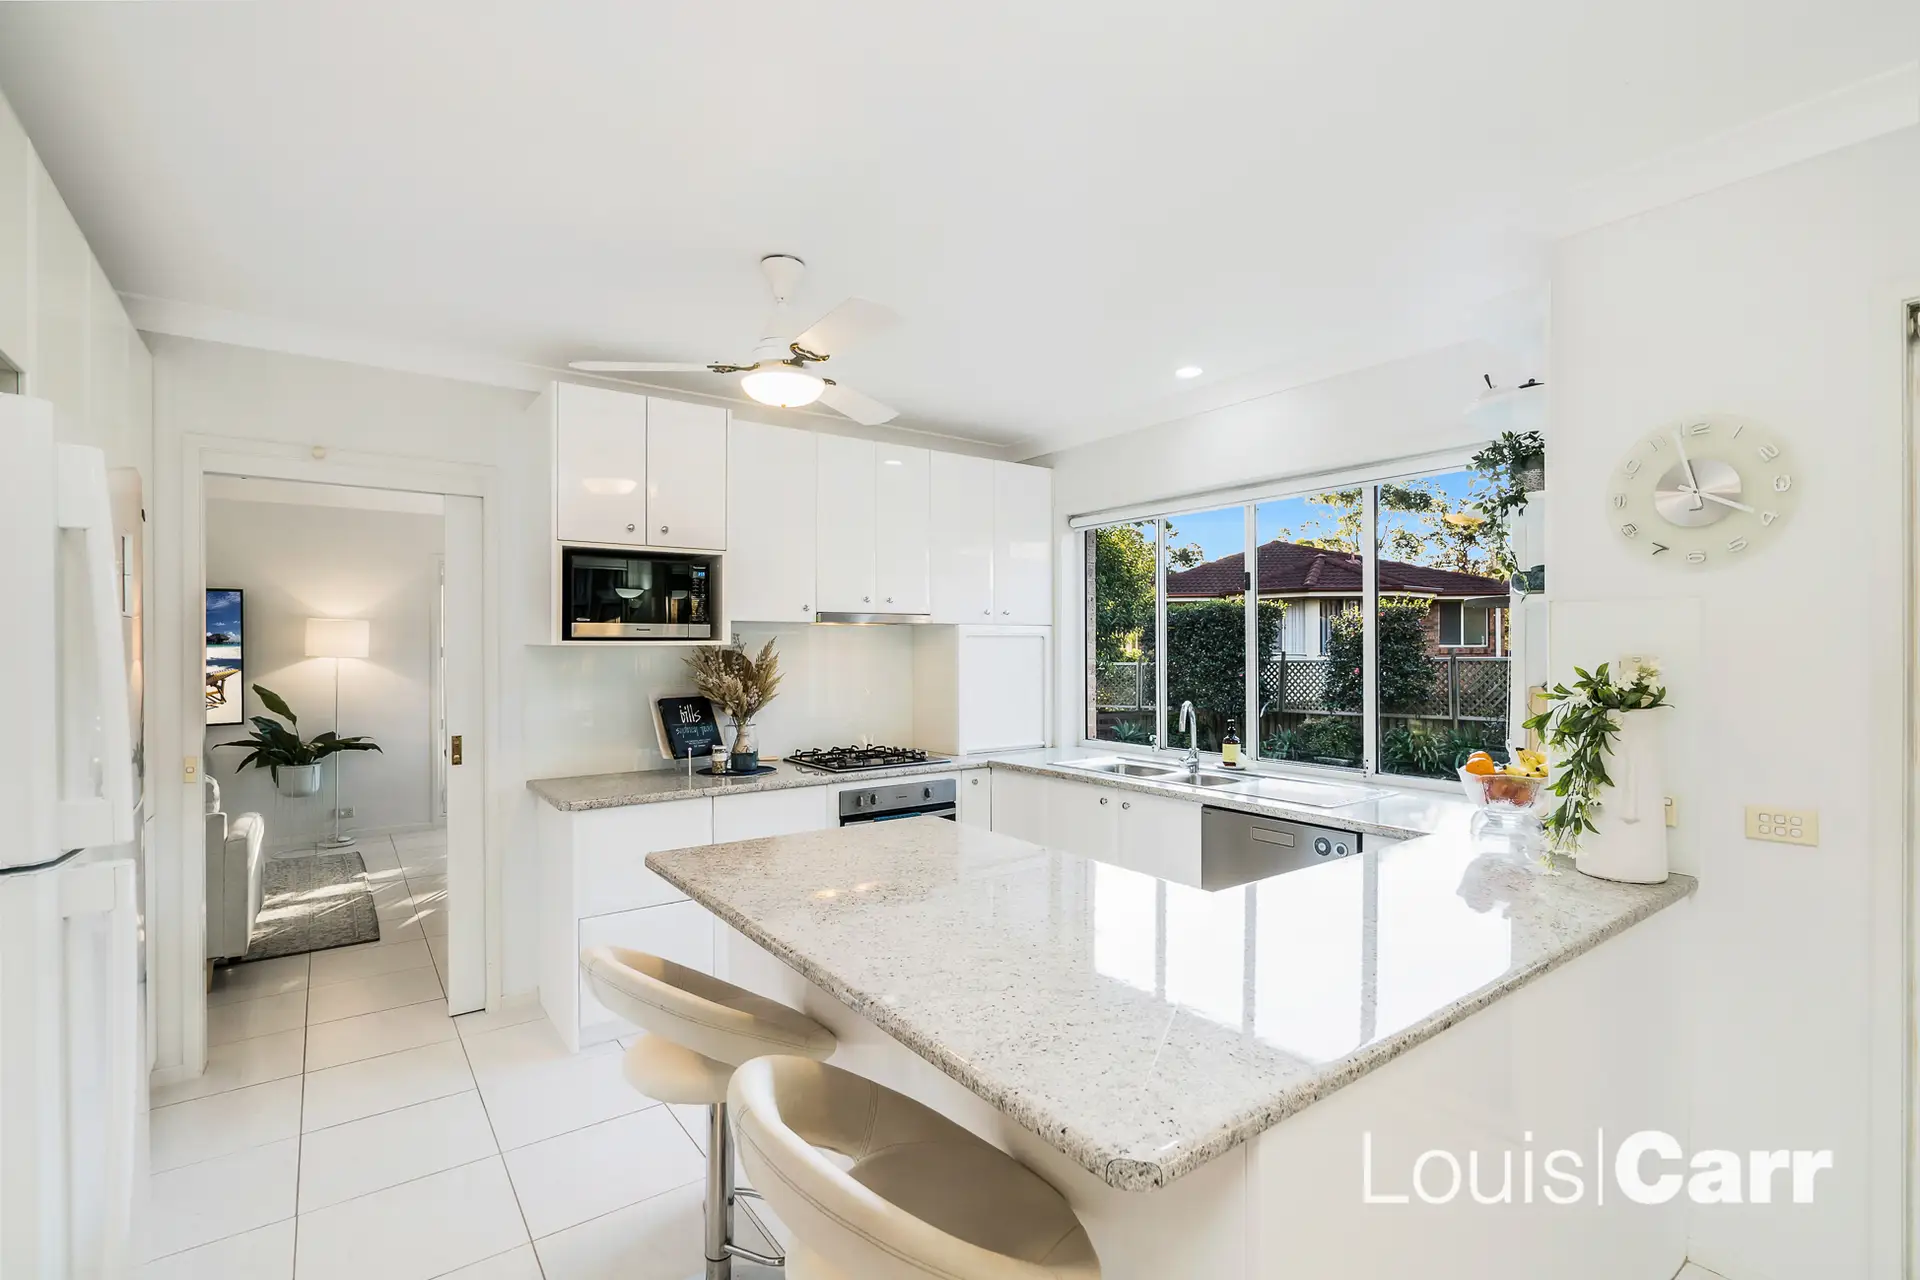 Photo #5: 3 Folkestone Place, Dural - Sold by Louis Carr Real Estate